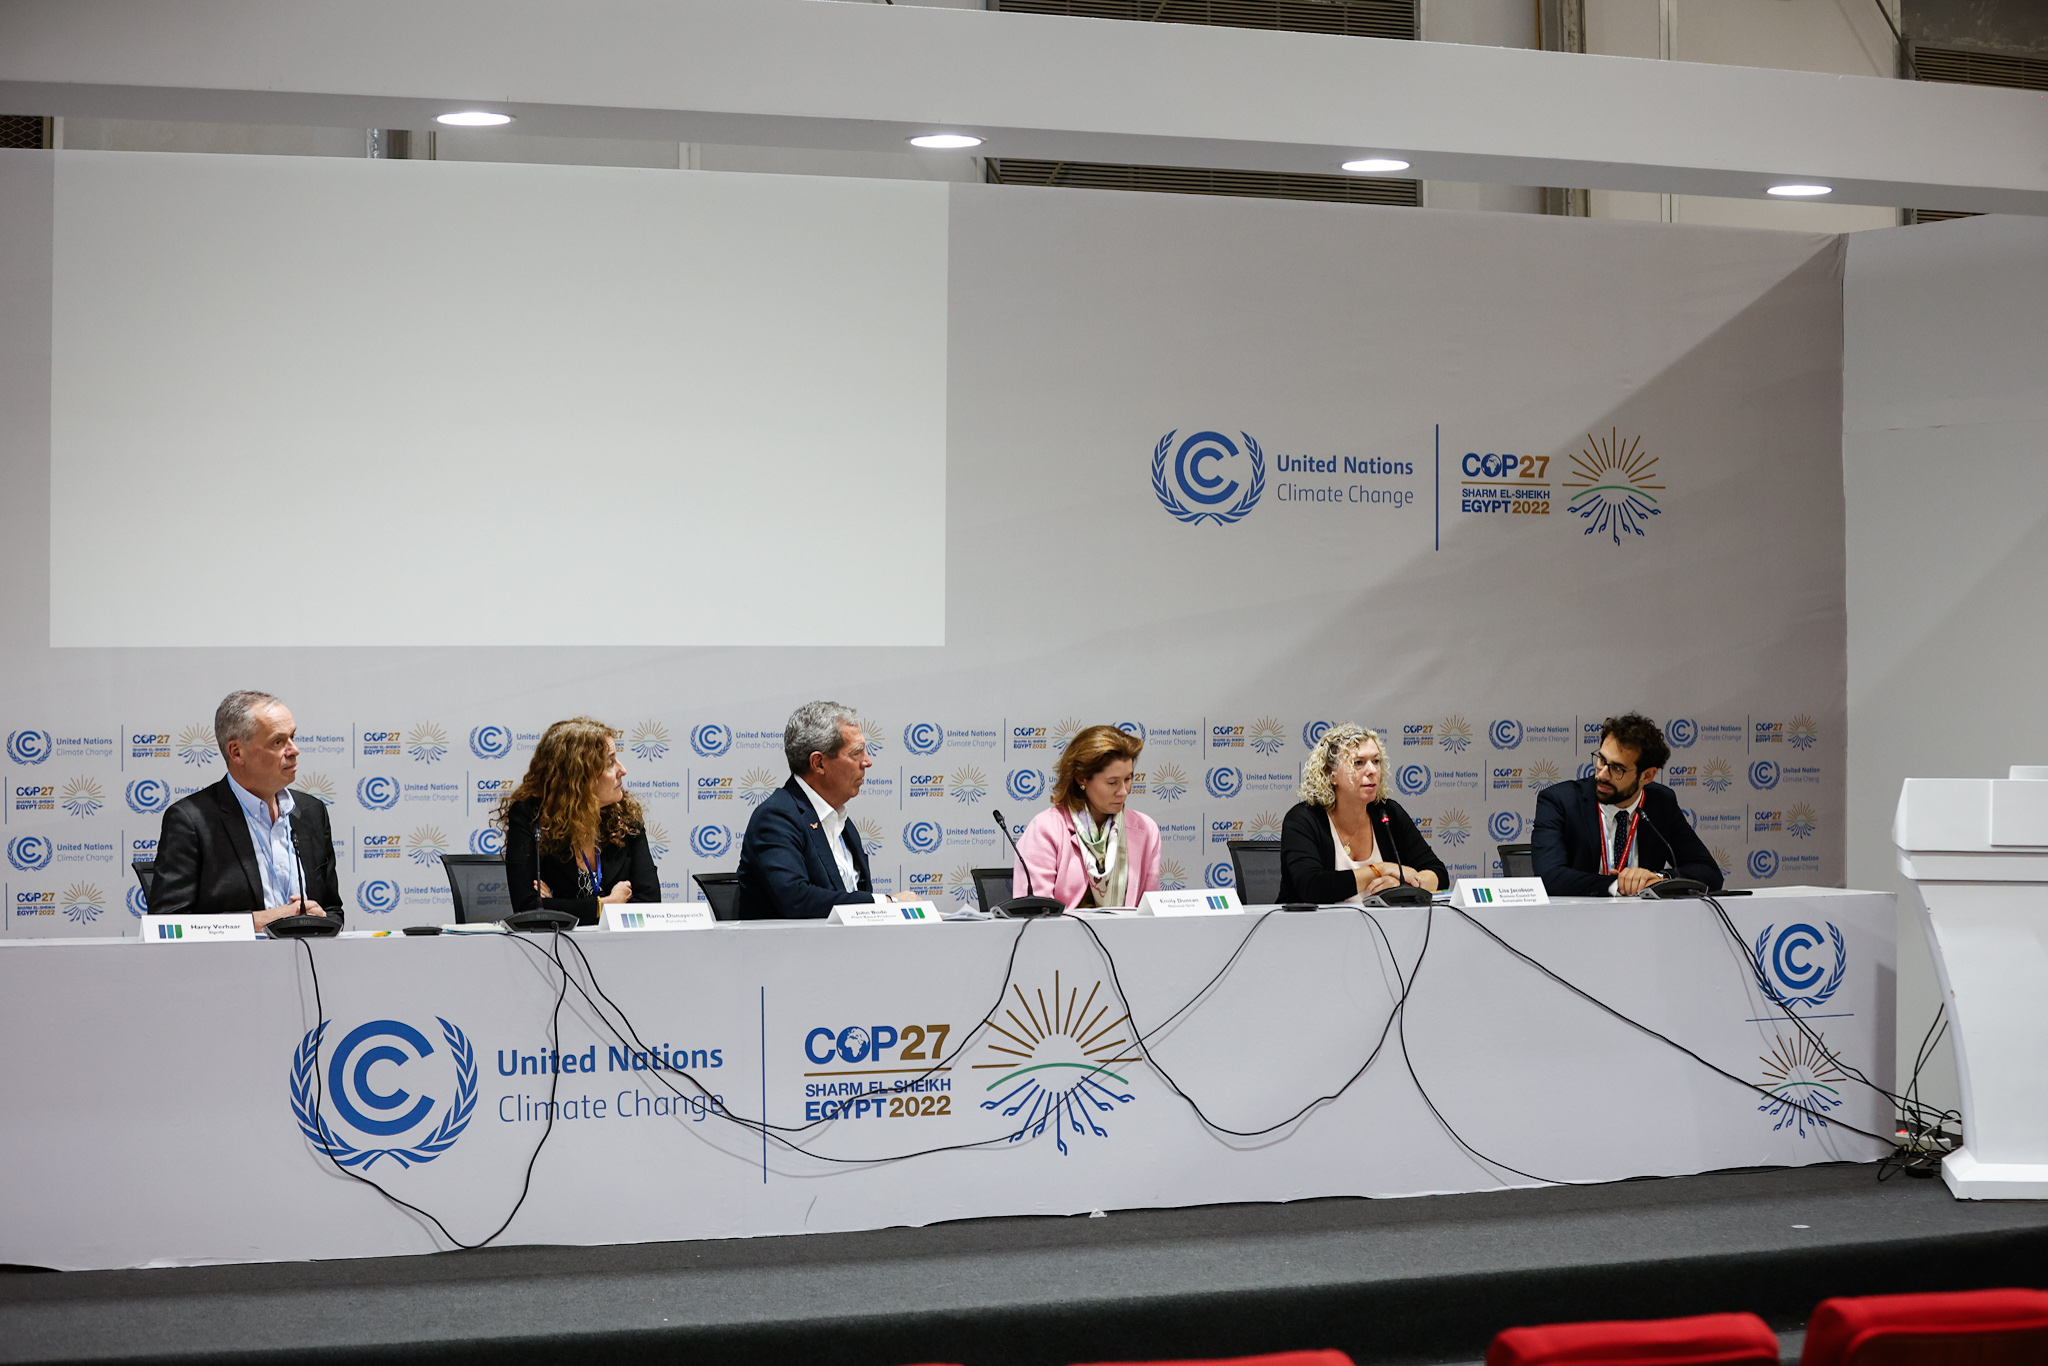 BCSE at COP27, Solutions for a Net-Zero Economy